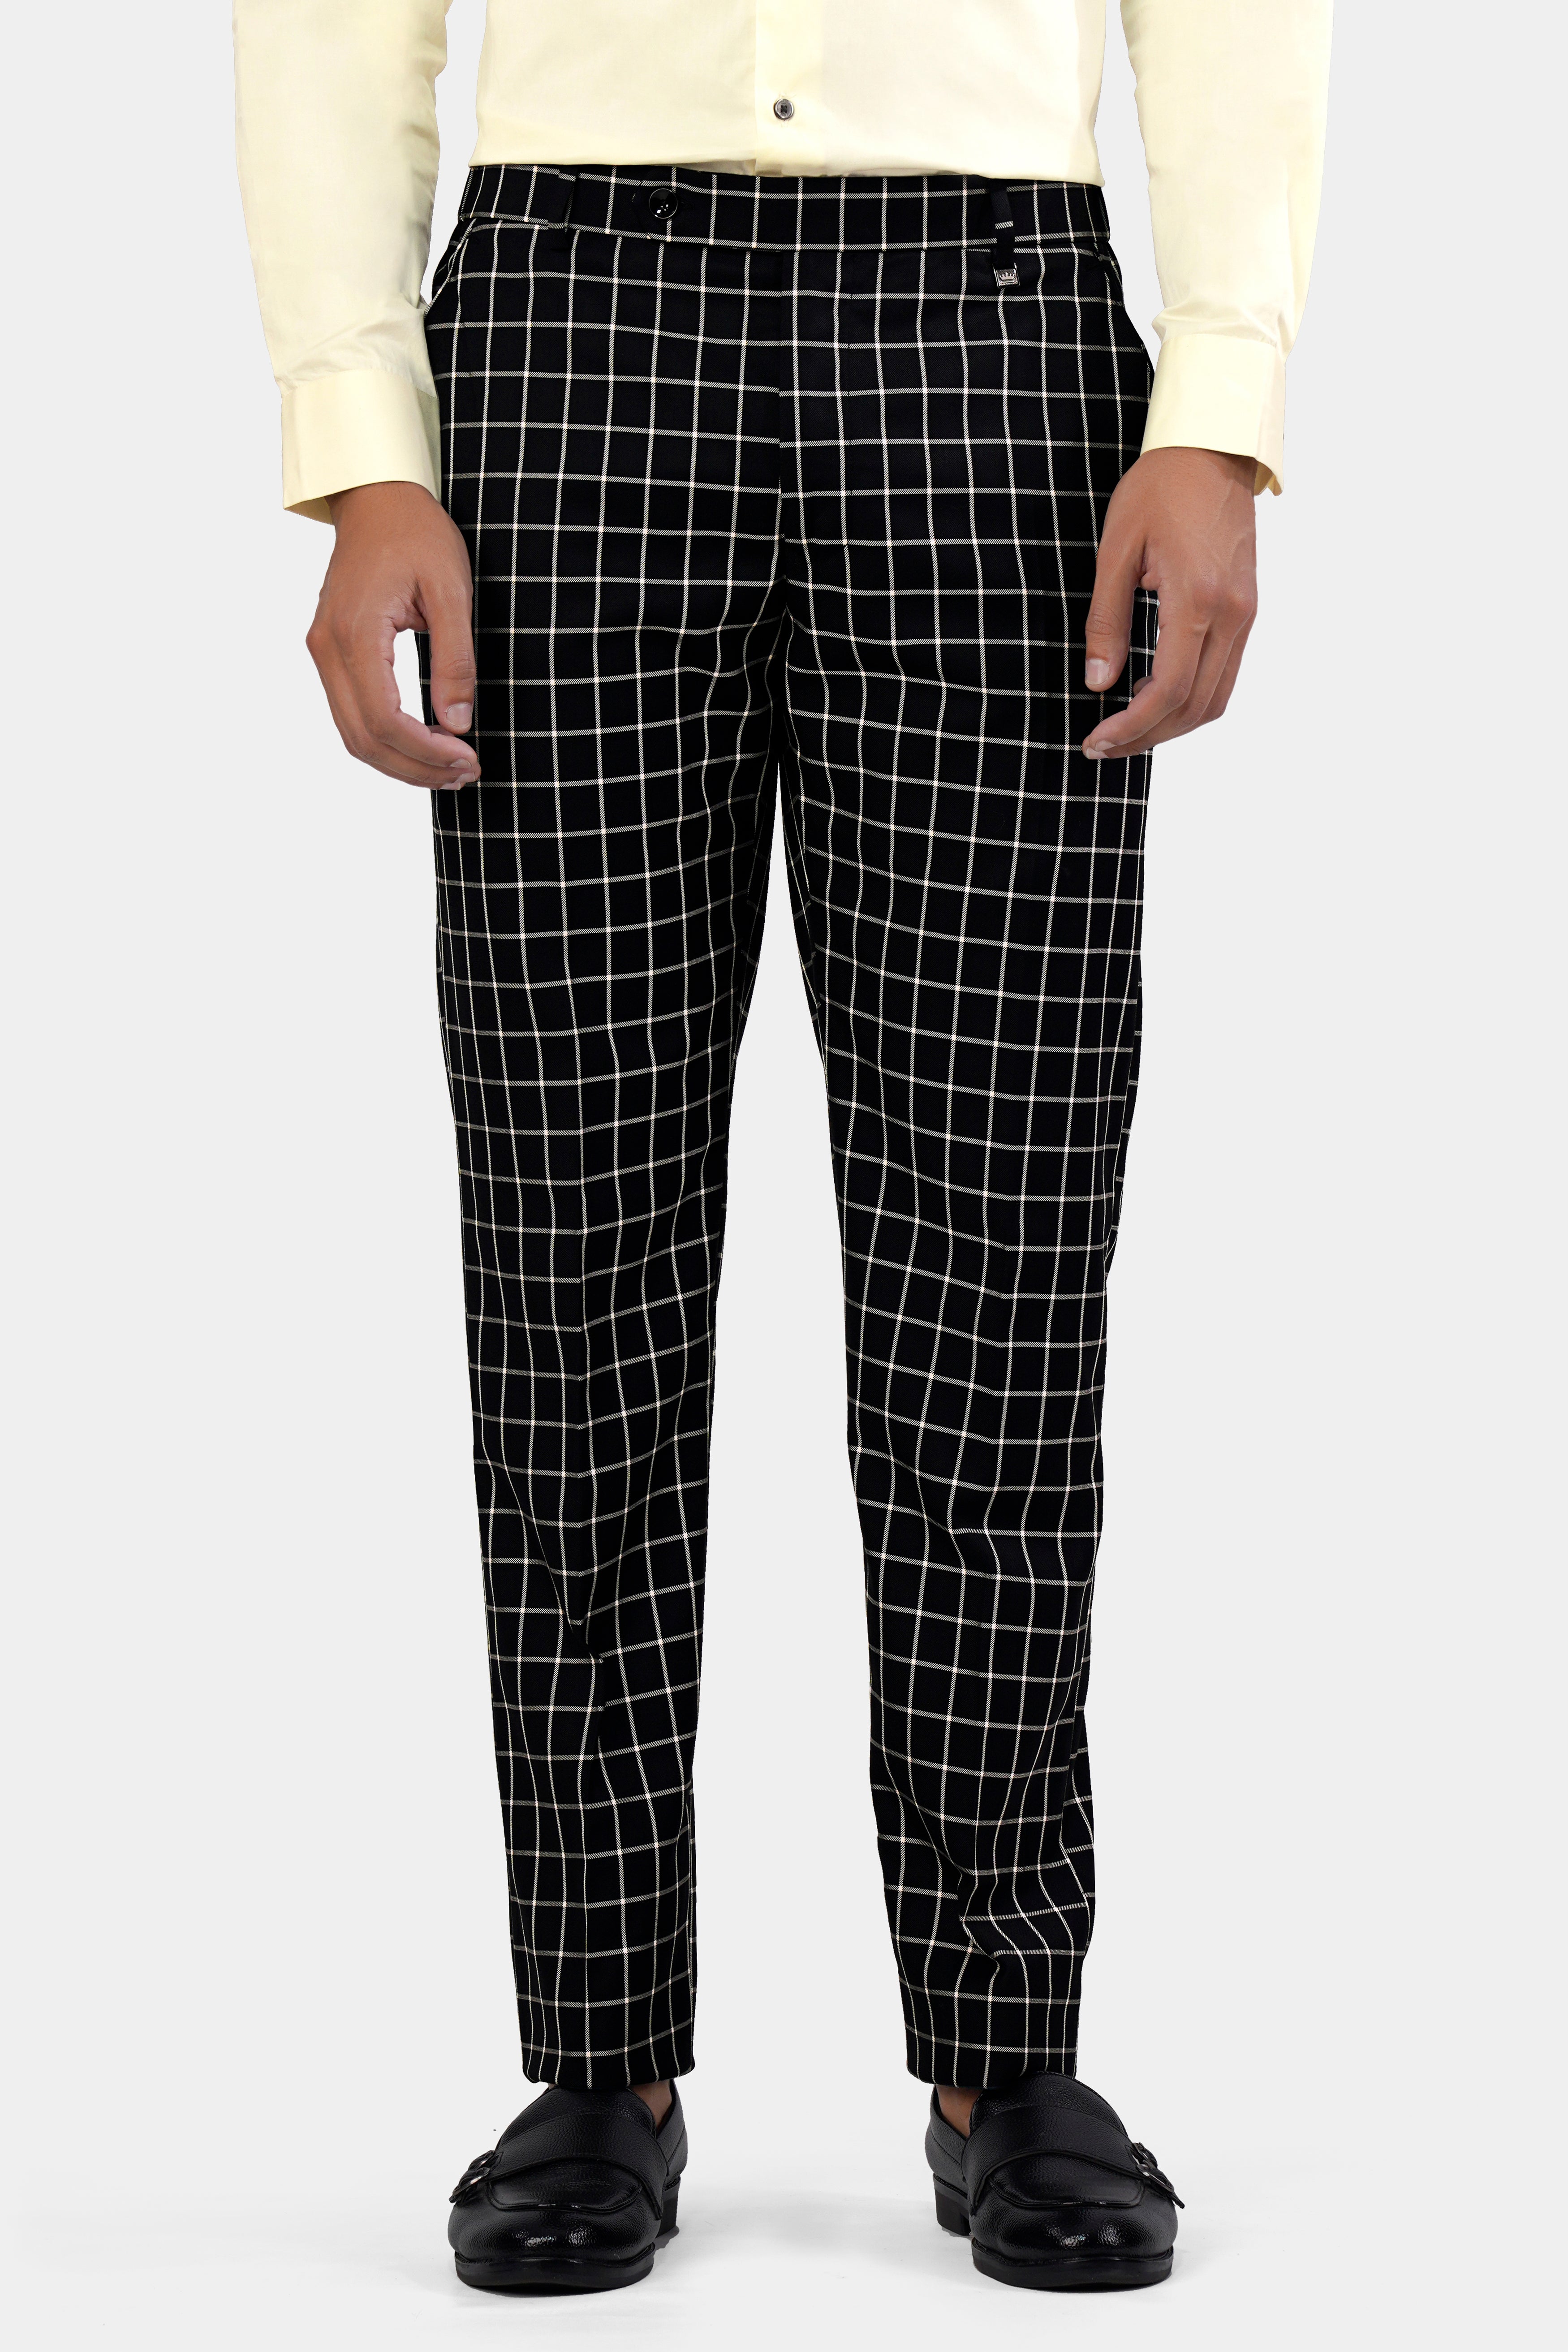 Jade Black and White Checkered Wool Rich Double Breasted Suit ST2932-DB-36,ST2932-DB-38,ST2932-DB-40,ST2932-DB-42,ST2932-DB-44,ST2932-DB-46,ST2932-DB-48,ST2932-DB-50,ST2932-DB-52,ST2932-DB-54,ST2932-DB-56,ST2932-DB-58,ST2932-DB-60